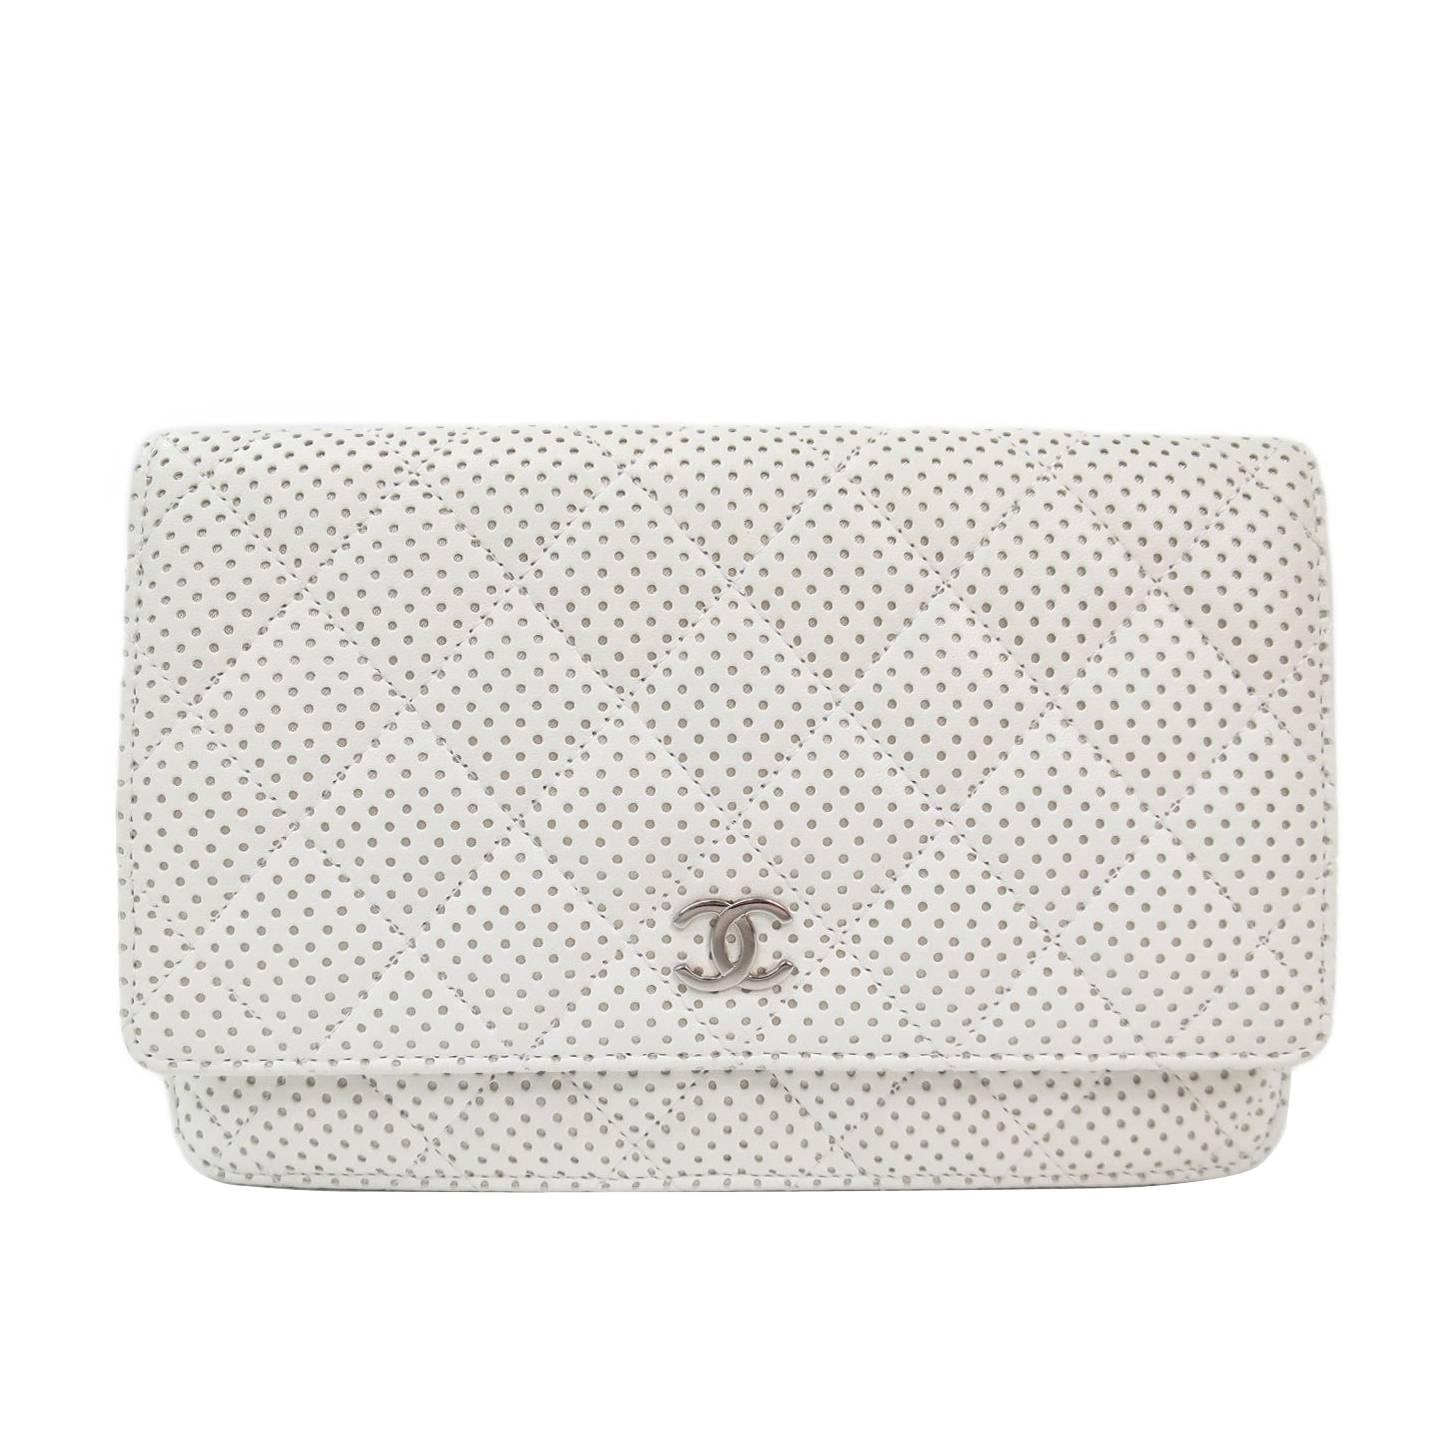 Chanel White Leather Perforated Silver Hardware Clutch Wallet 